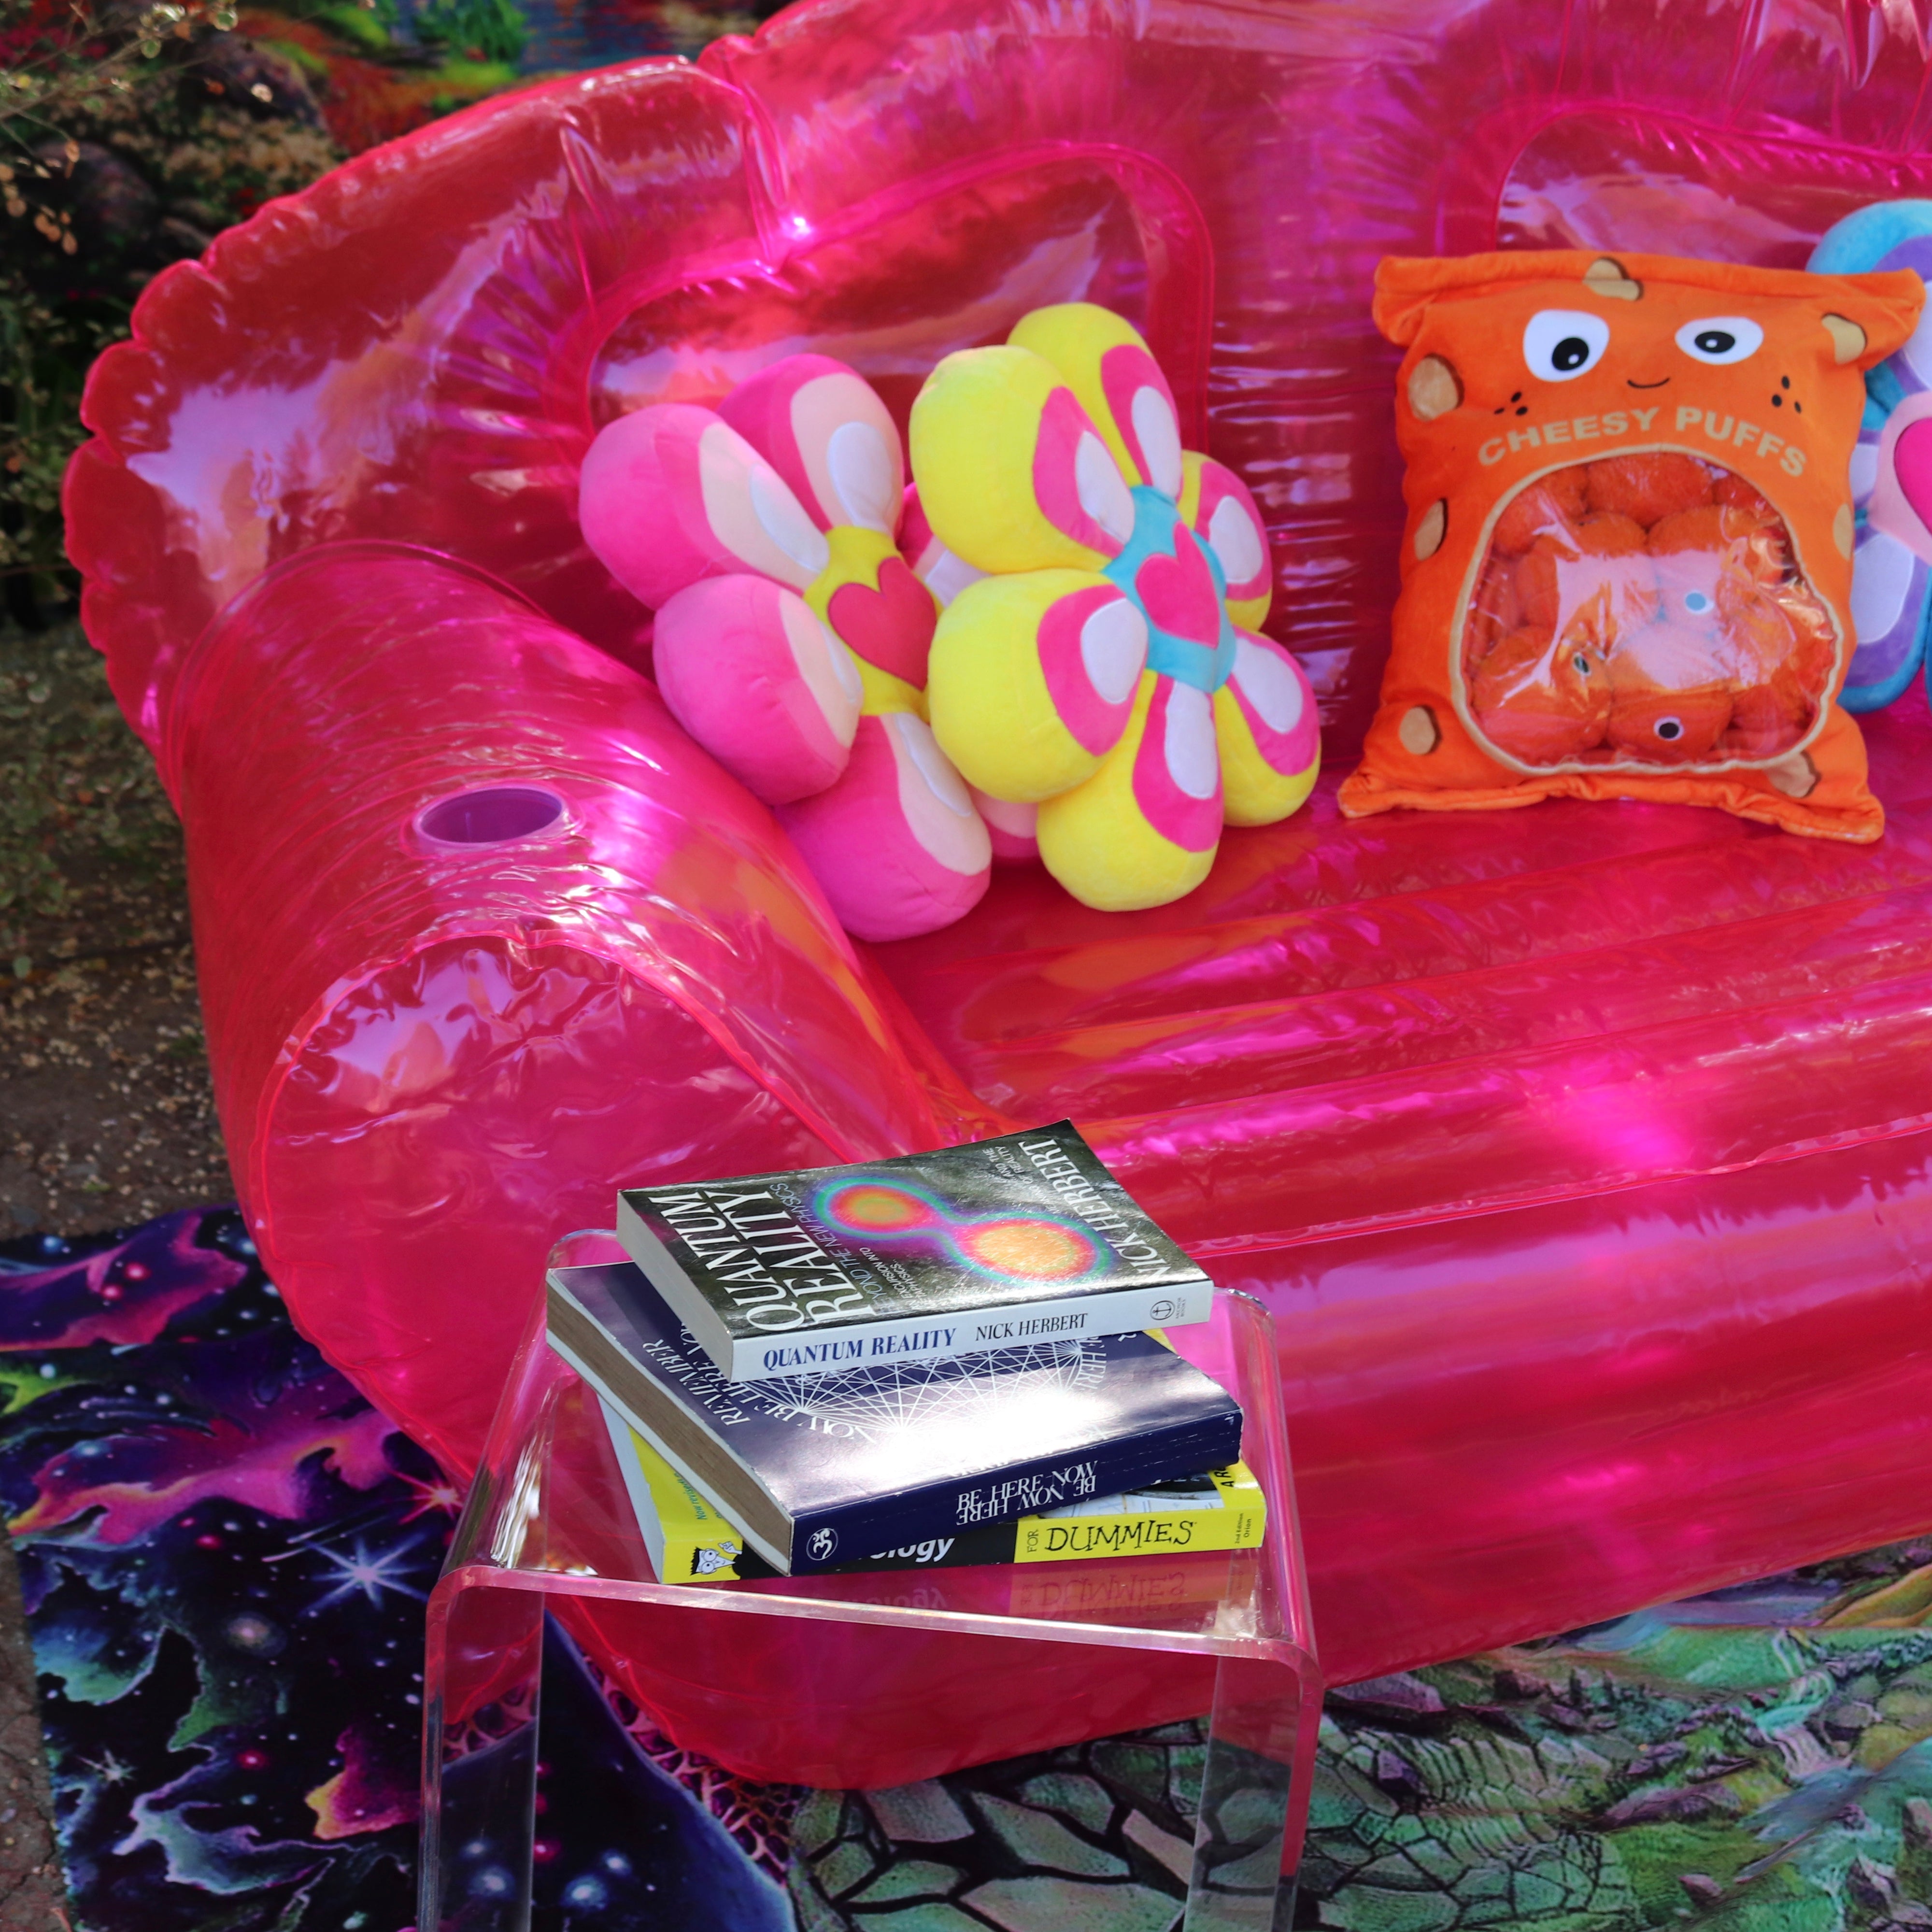 90s Style Hot Pink Inflatable Loveseat